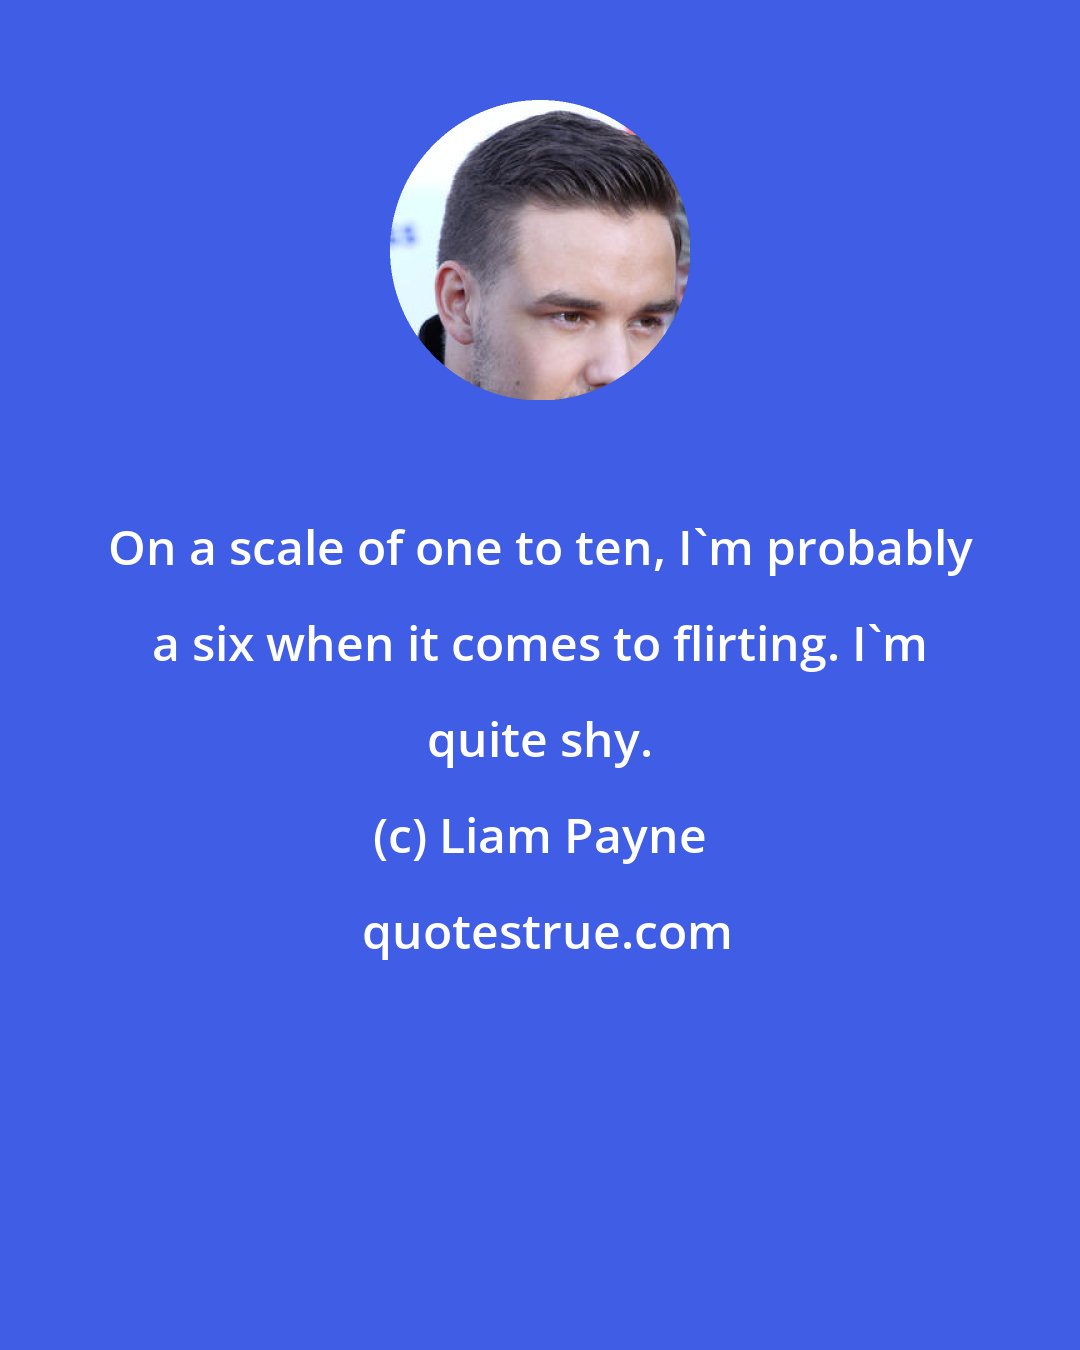 Liam Payne: On a scale of one to ten, I'm probably a six when it comes to flirting. I'm quite shy.